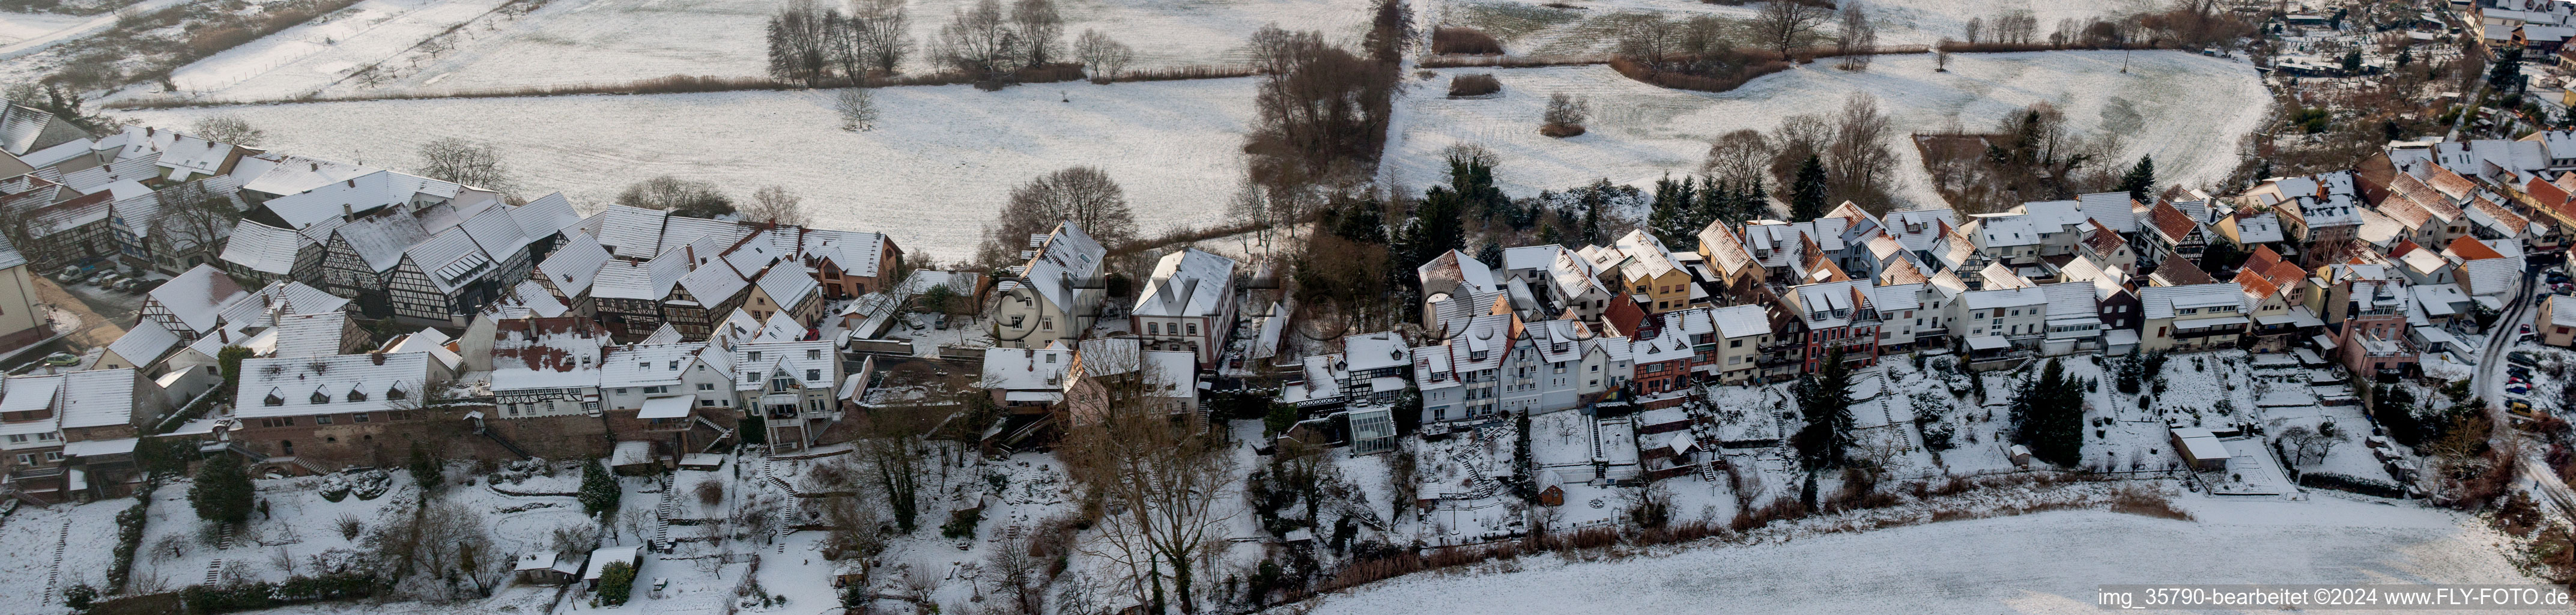 Aerial view of Wintry snowy Village view in Jockgrim in the state Rhineland-Palatinate, Germany